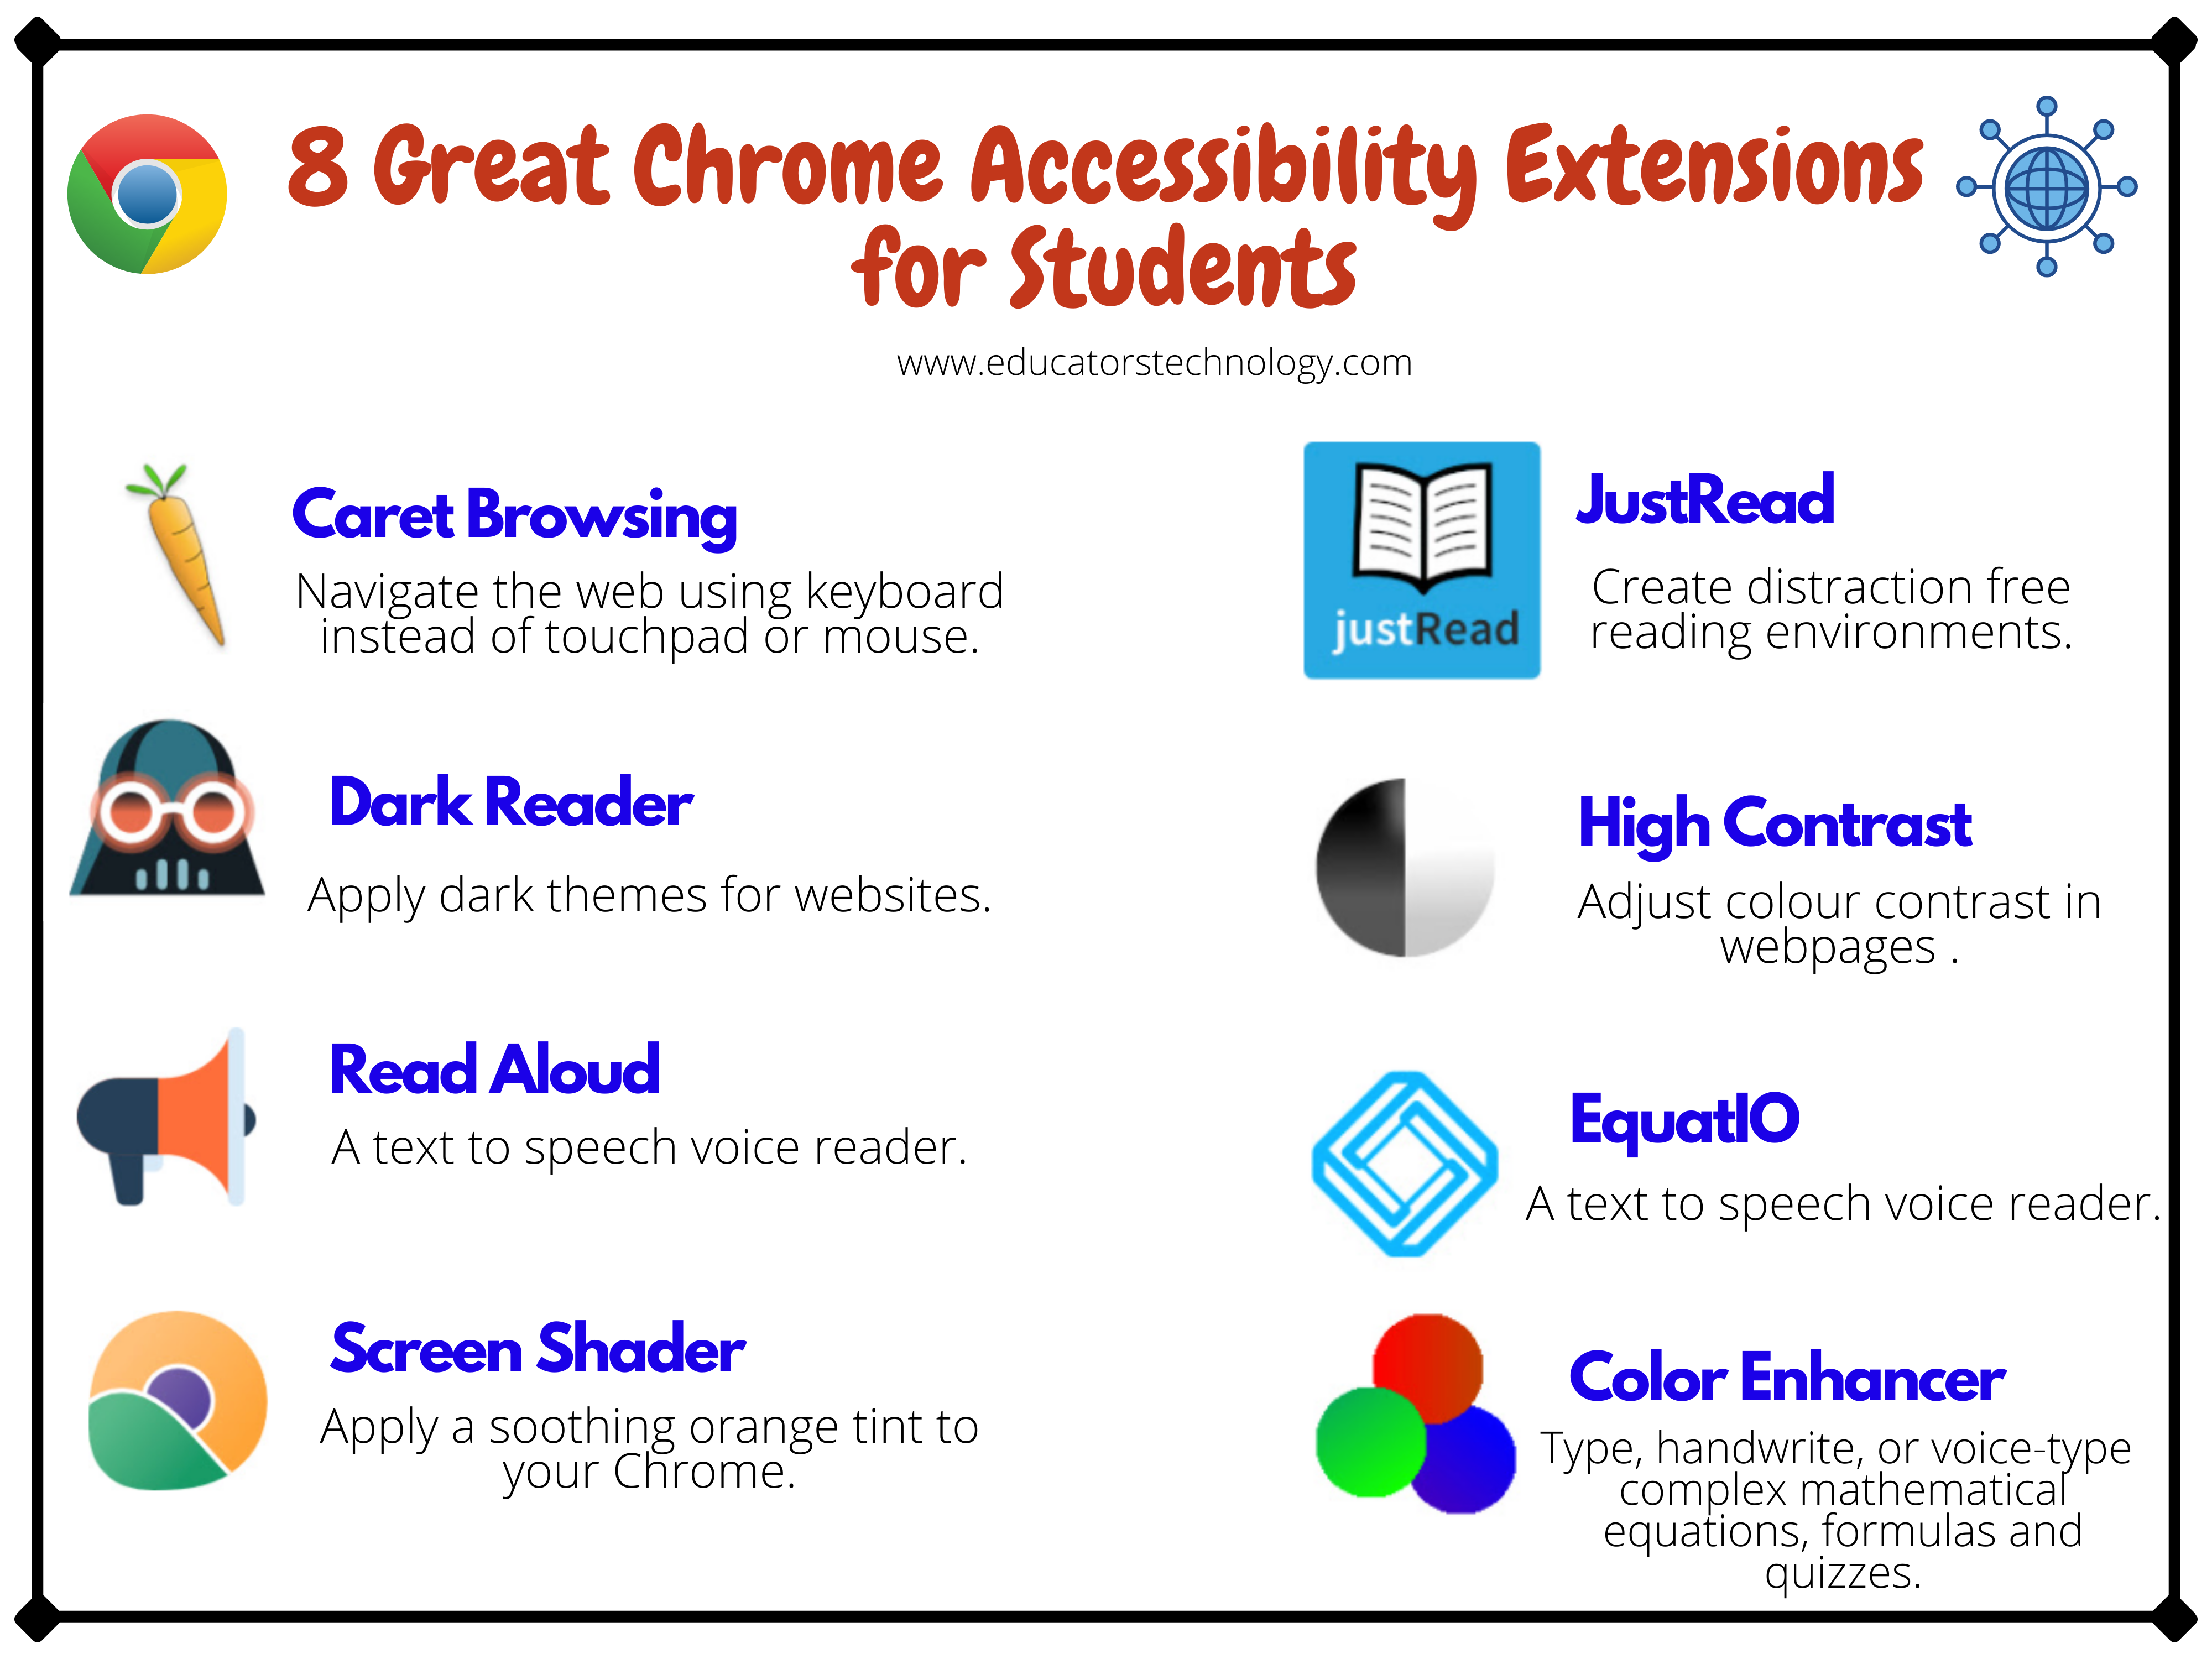 8 Great Chrome Accessibility Extensions for Students